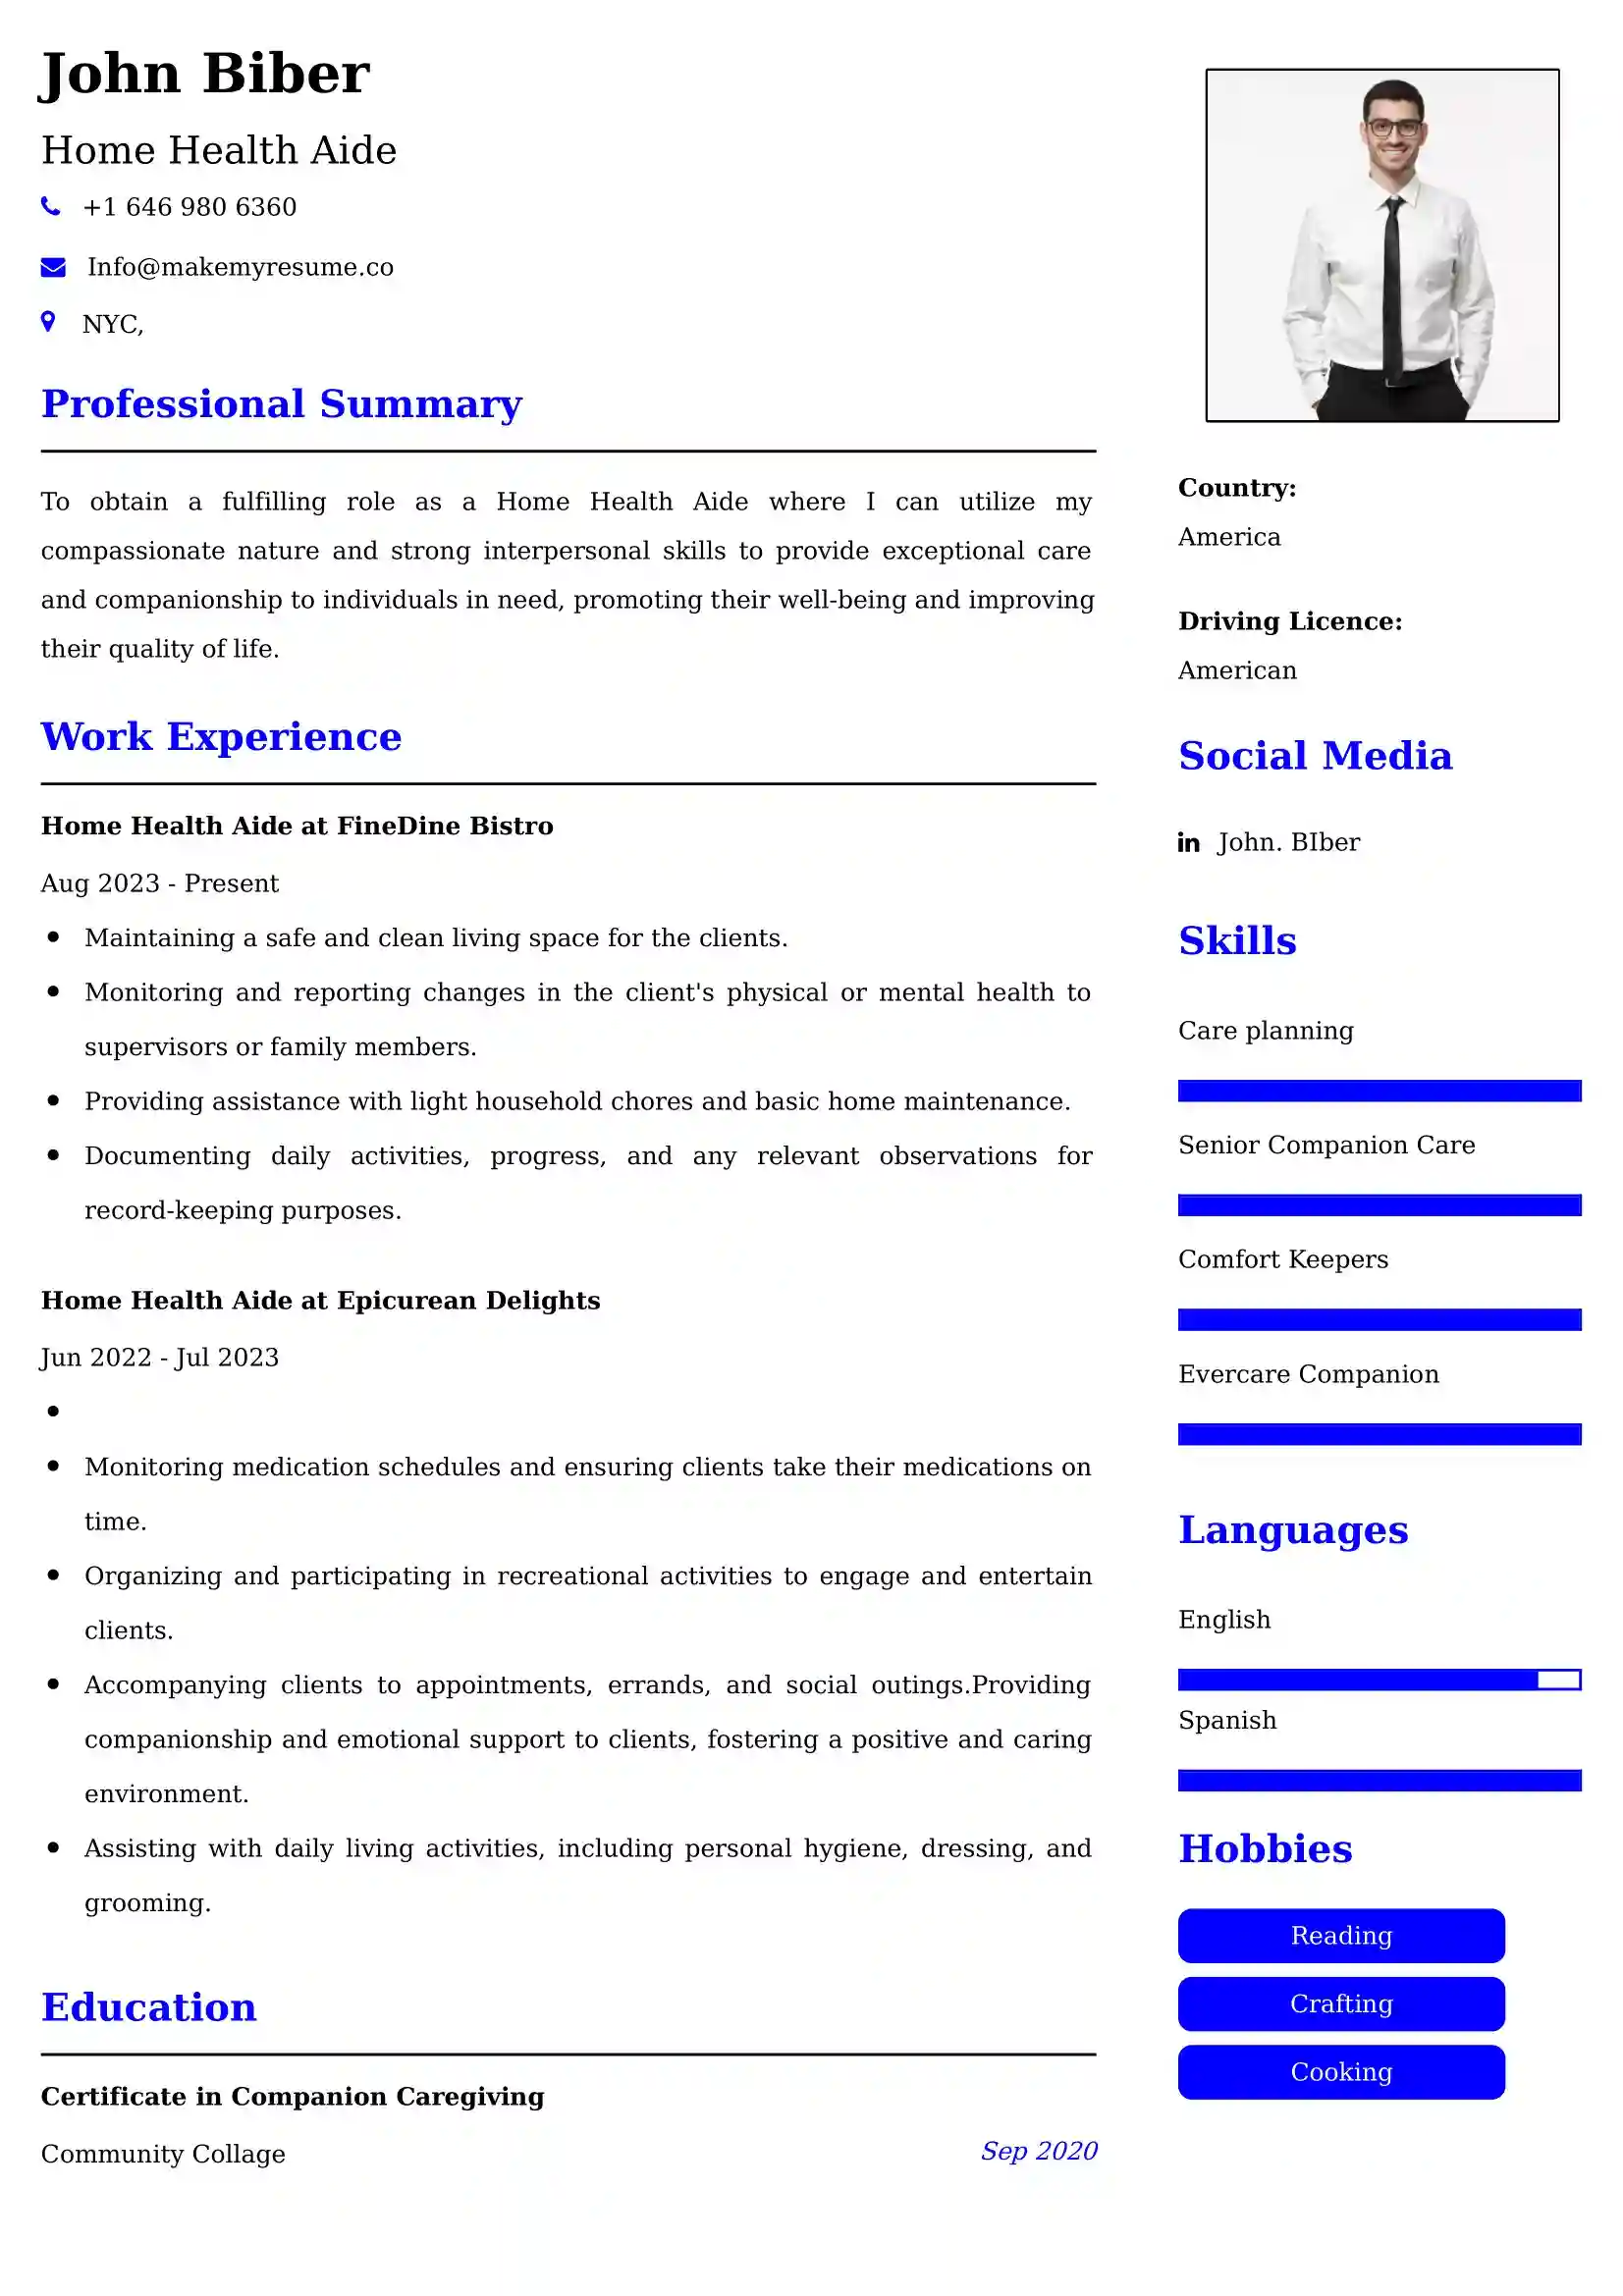 Home Health Aide Resume Examples for UK Jobs - Tips and Guide